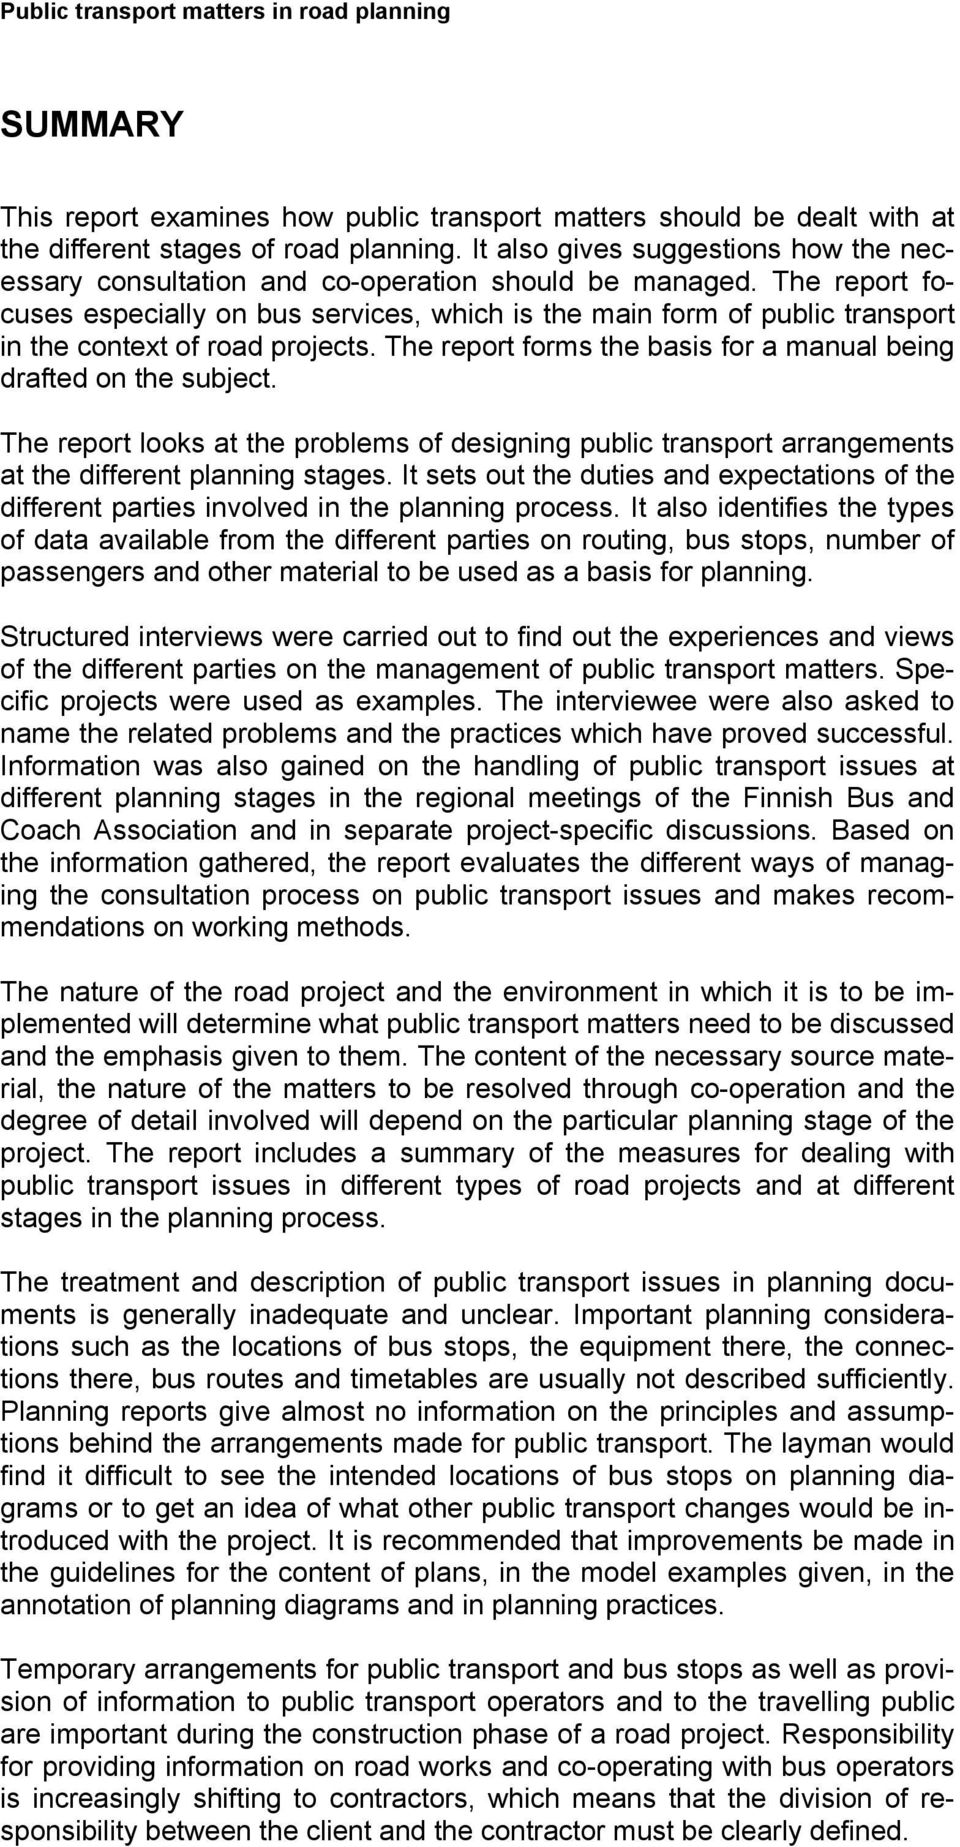 The report focuses especially on bus services, which is the main form of public transport in the context of road projects. The report forms the basis for a manual being drafted on the subject.